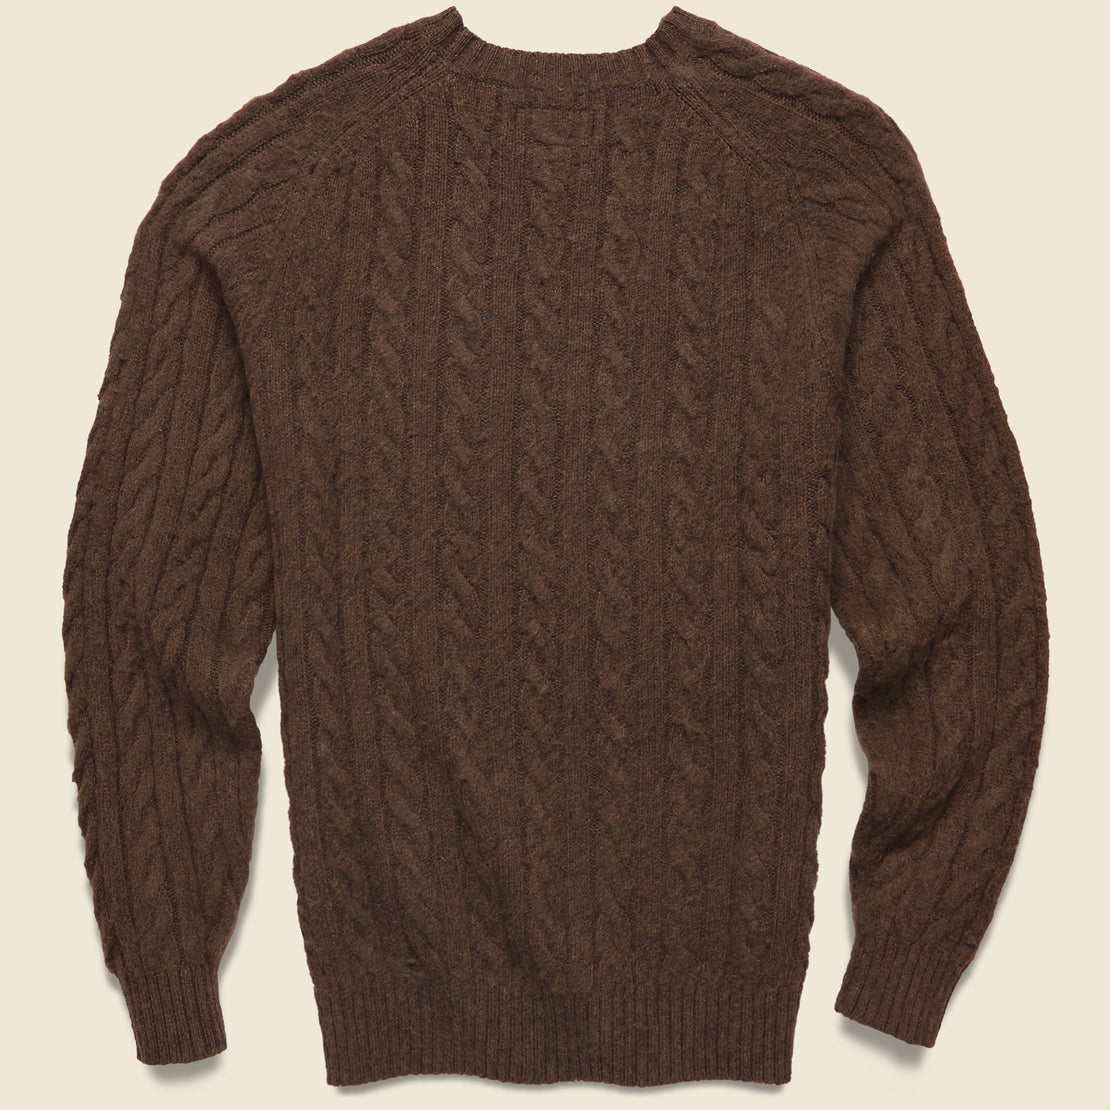 Shaggy Cable Crew Sweater - Brown - BEAMS+ - STAG Provisions - Tops - Sweater